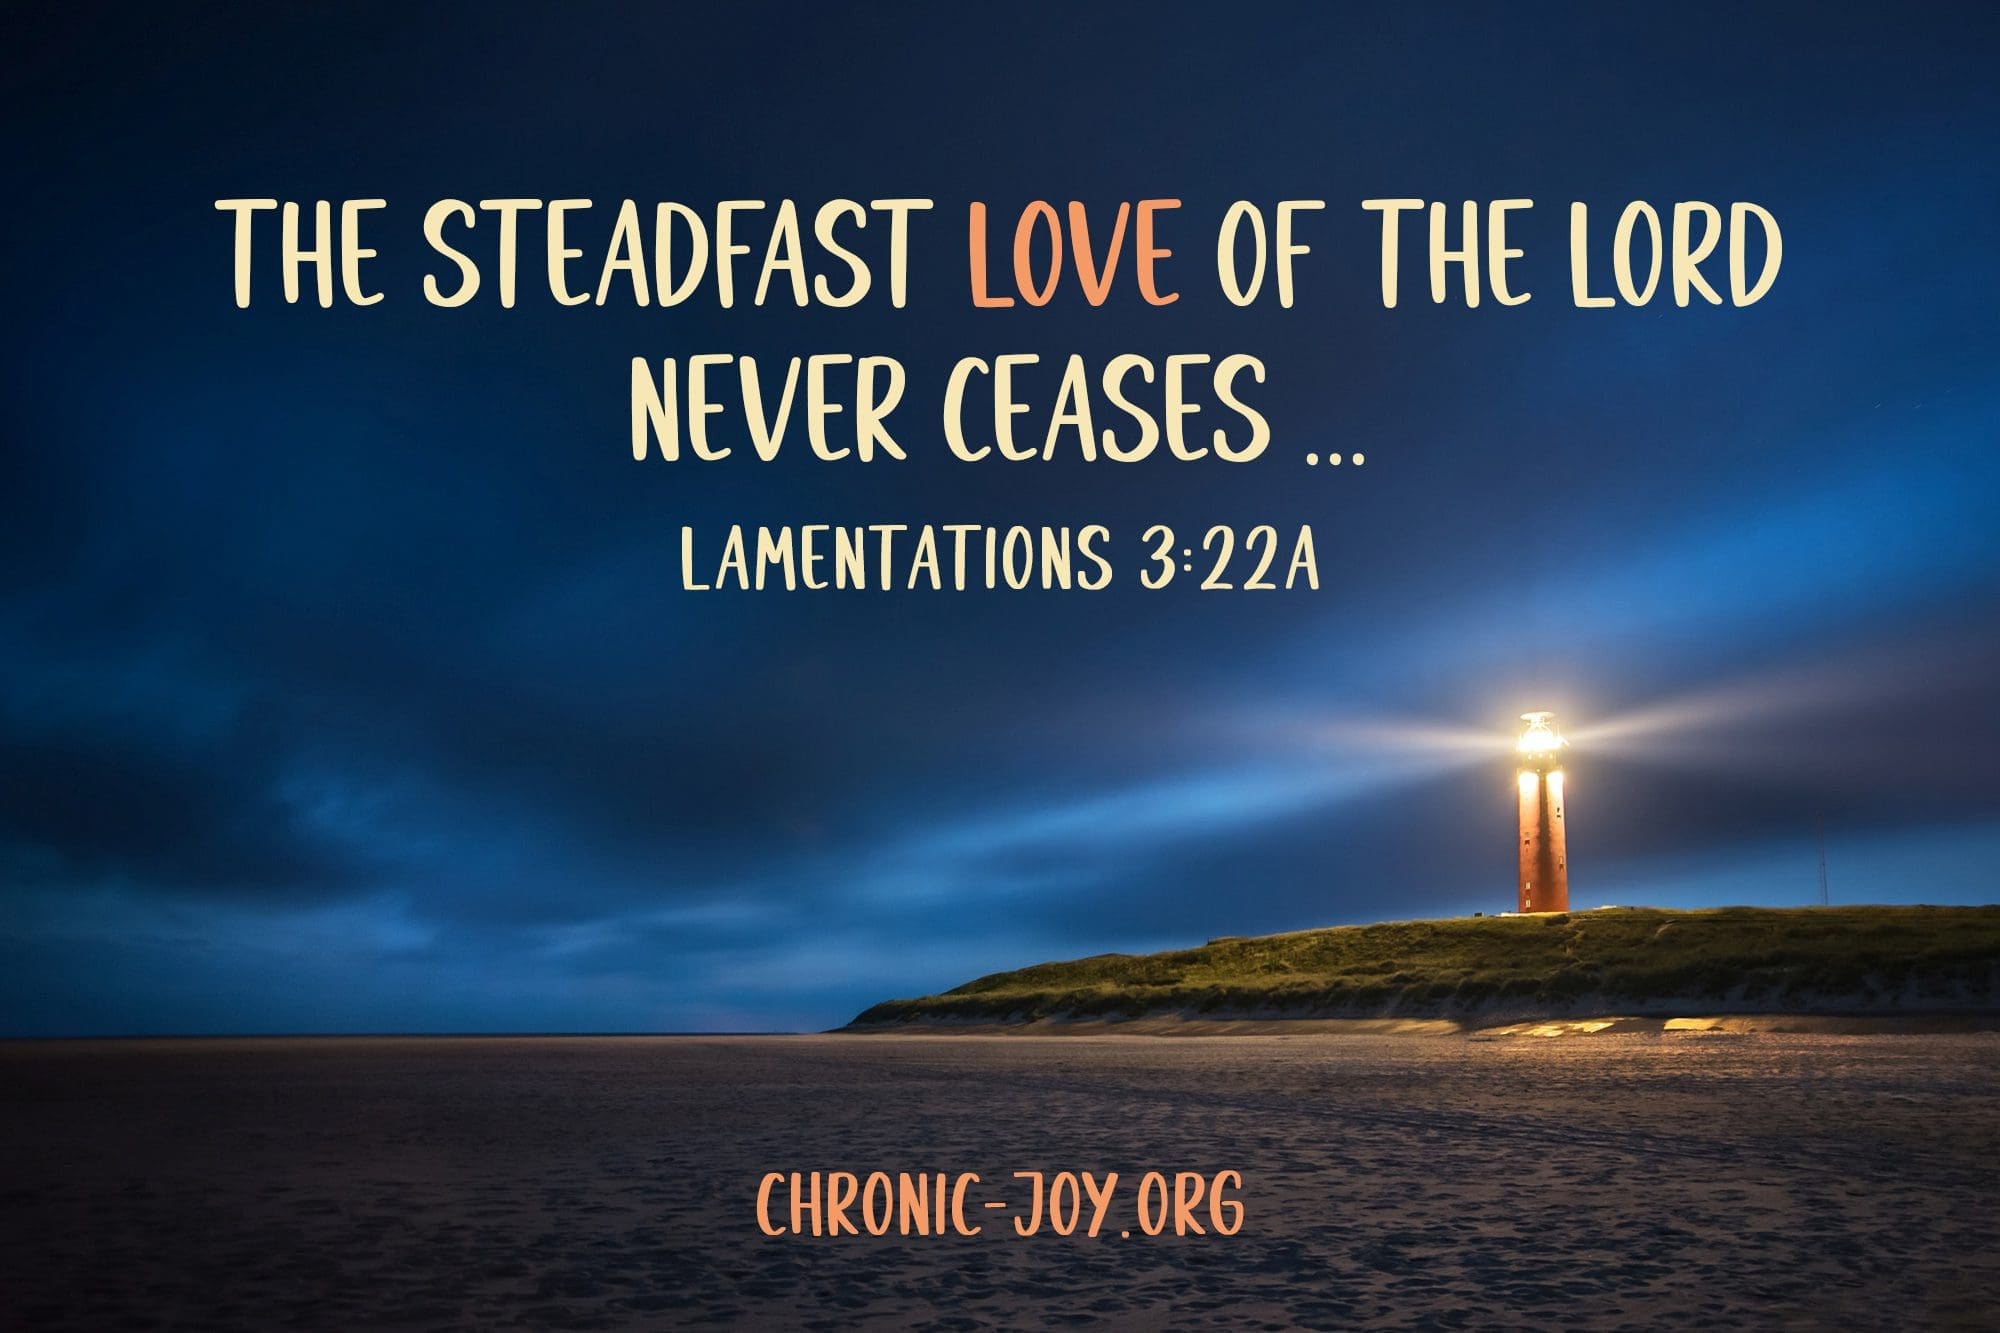 "The steadfast love of the Lord never ceases ..." Lamentations 3:22A ESV